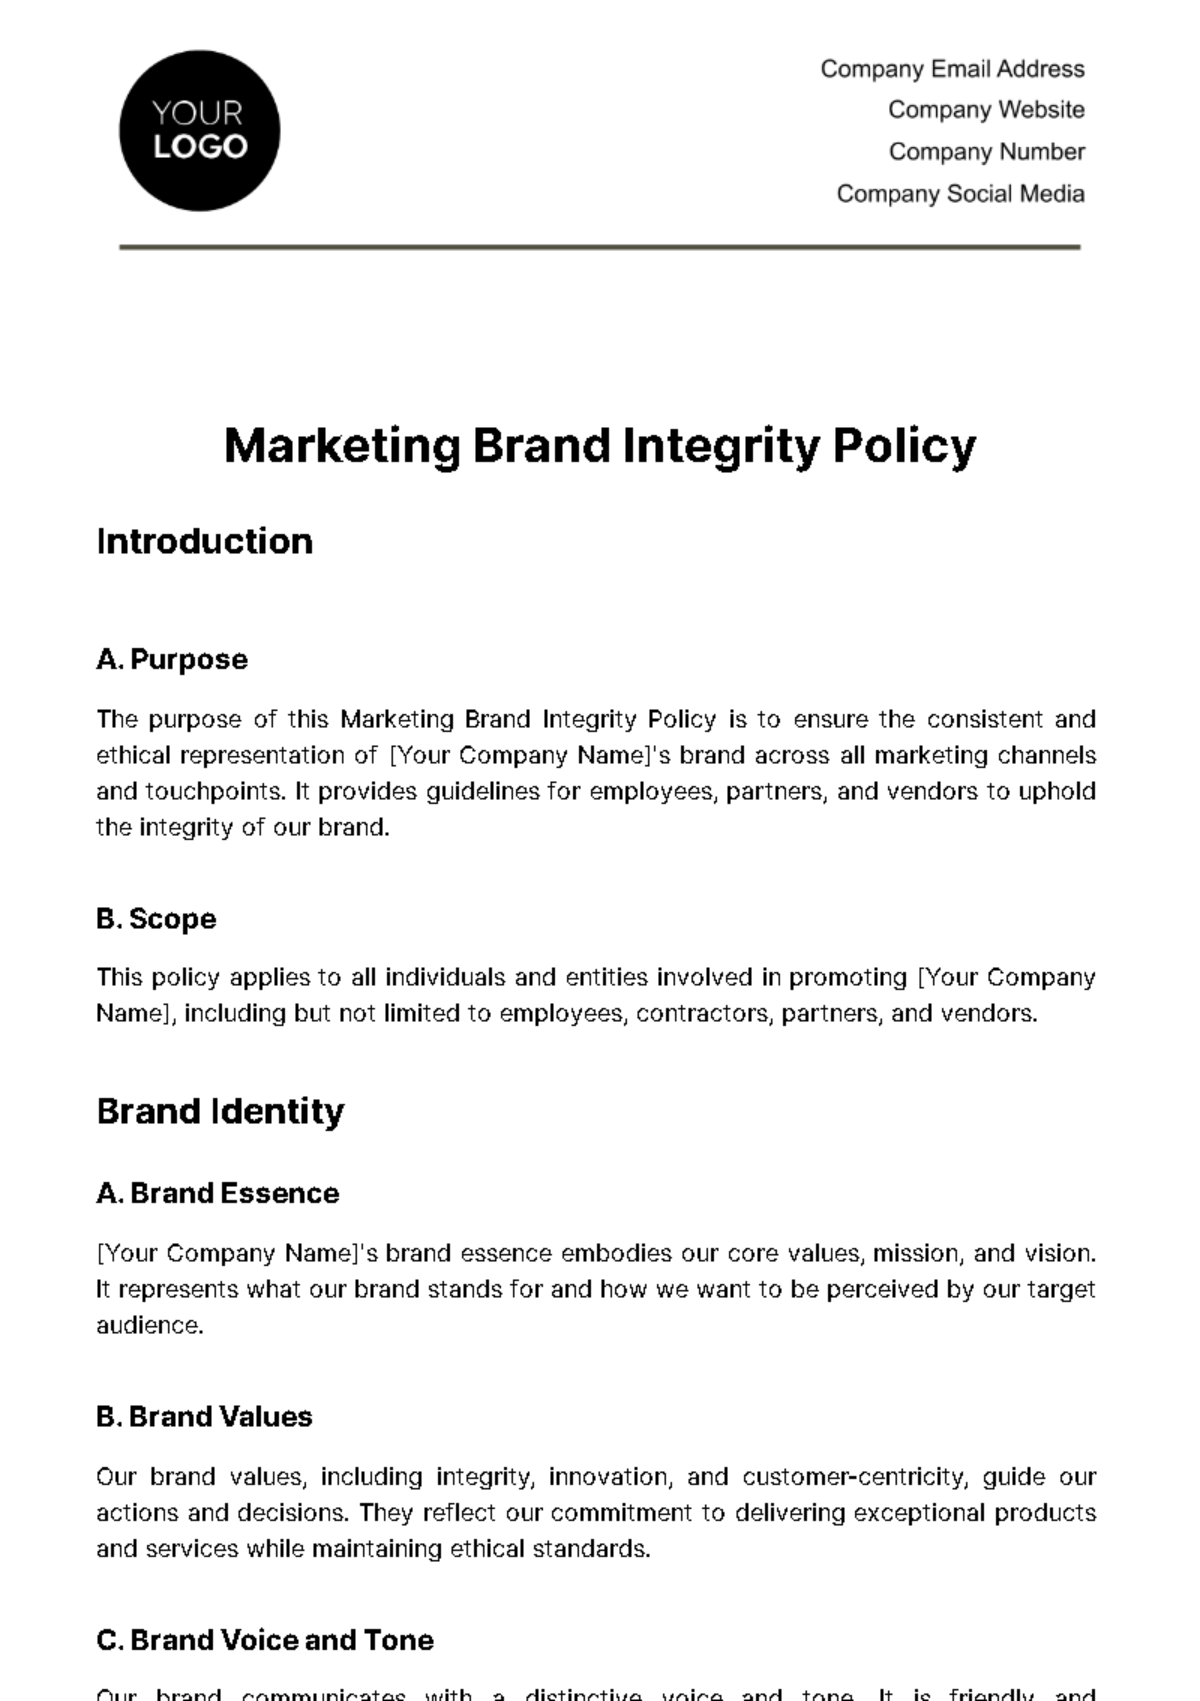 Free Marketing Brand Integrity Policy Template